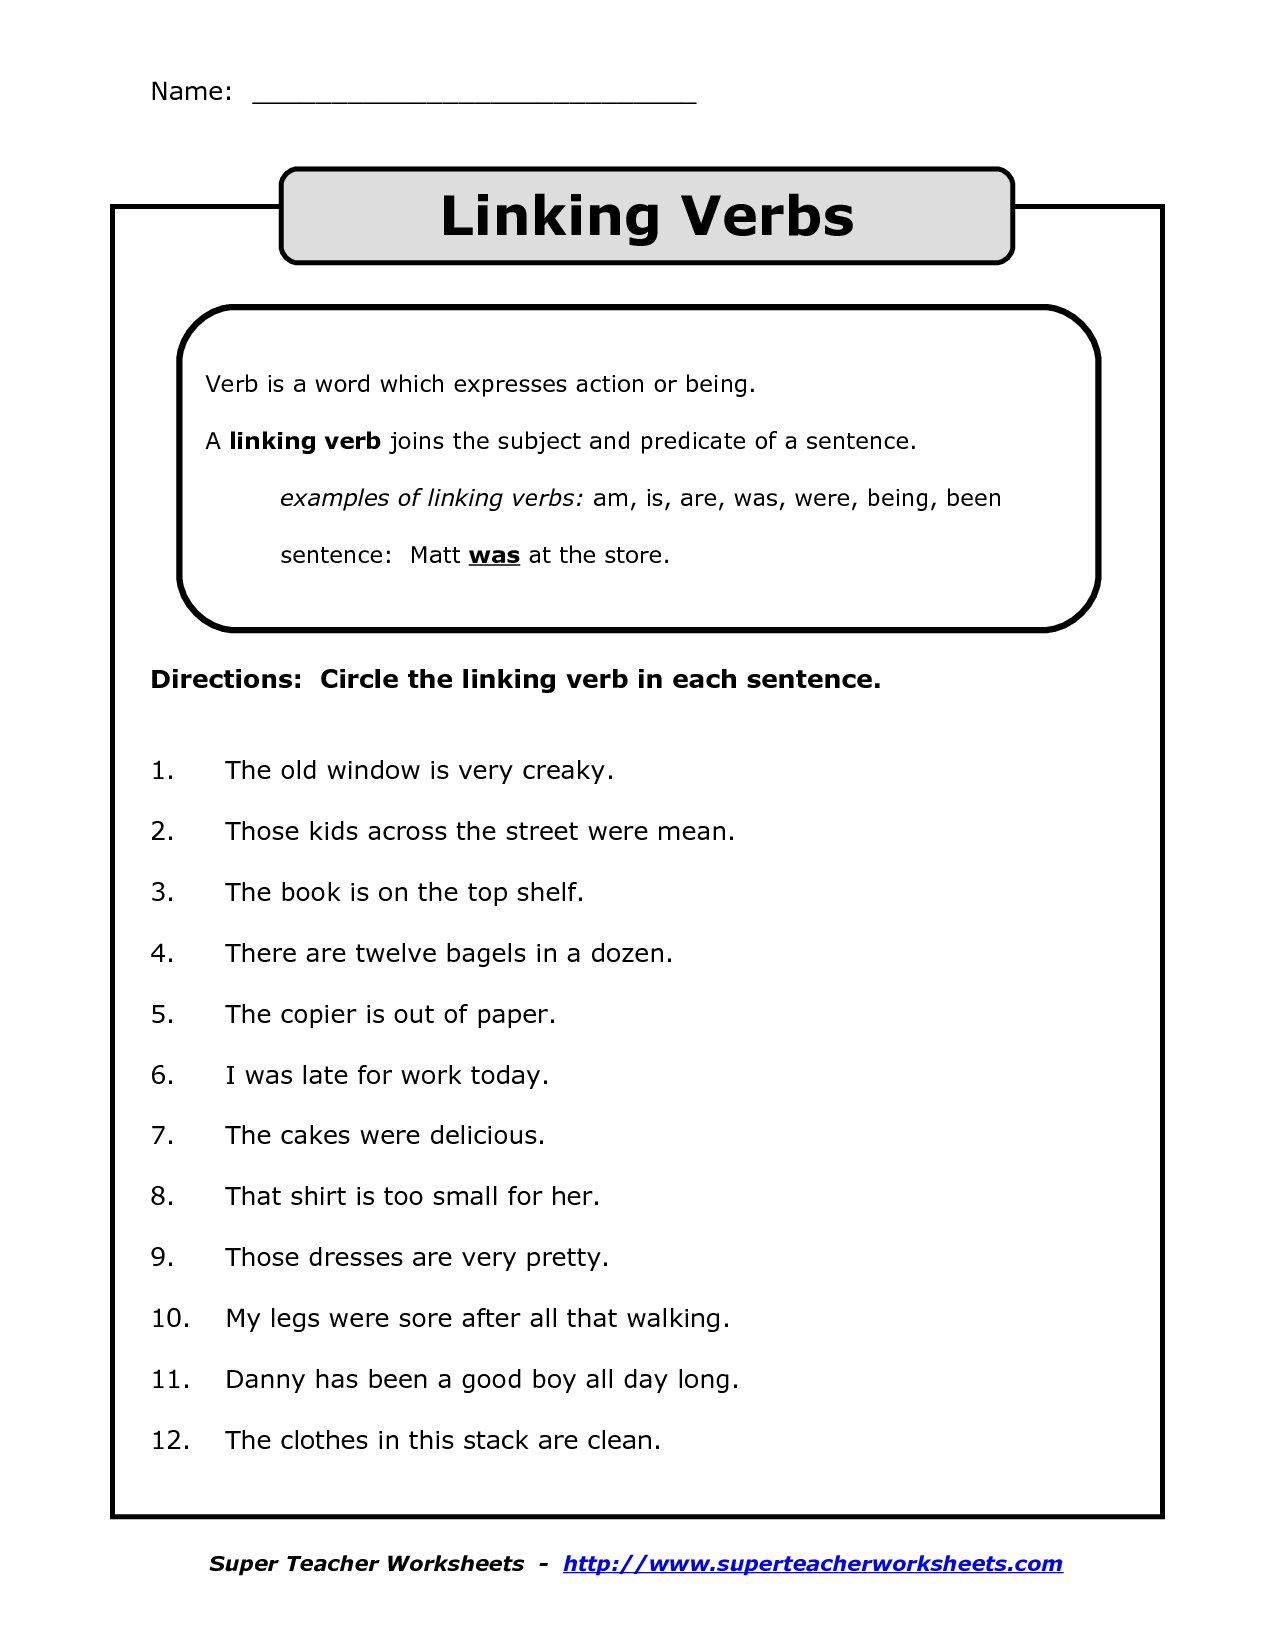 16-best-images-of-action-verb-linking-verb-worksheet-action-and